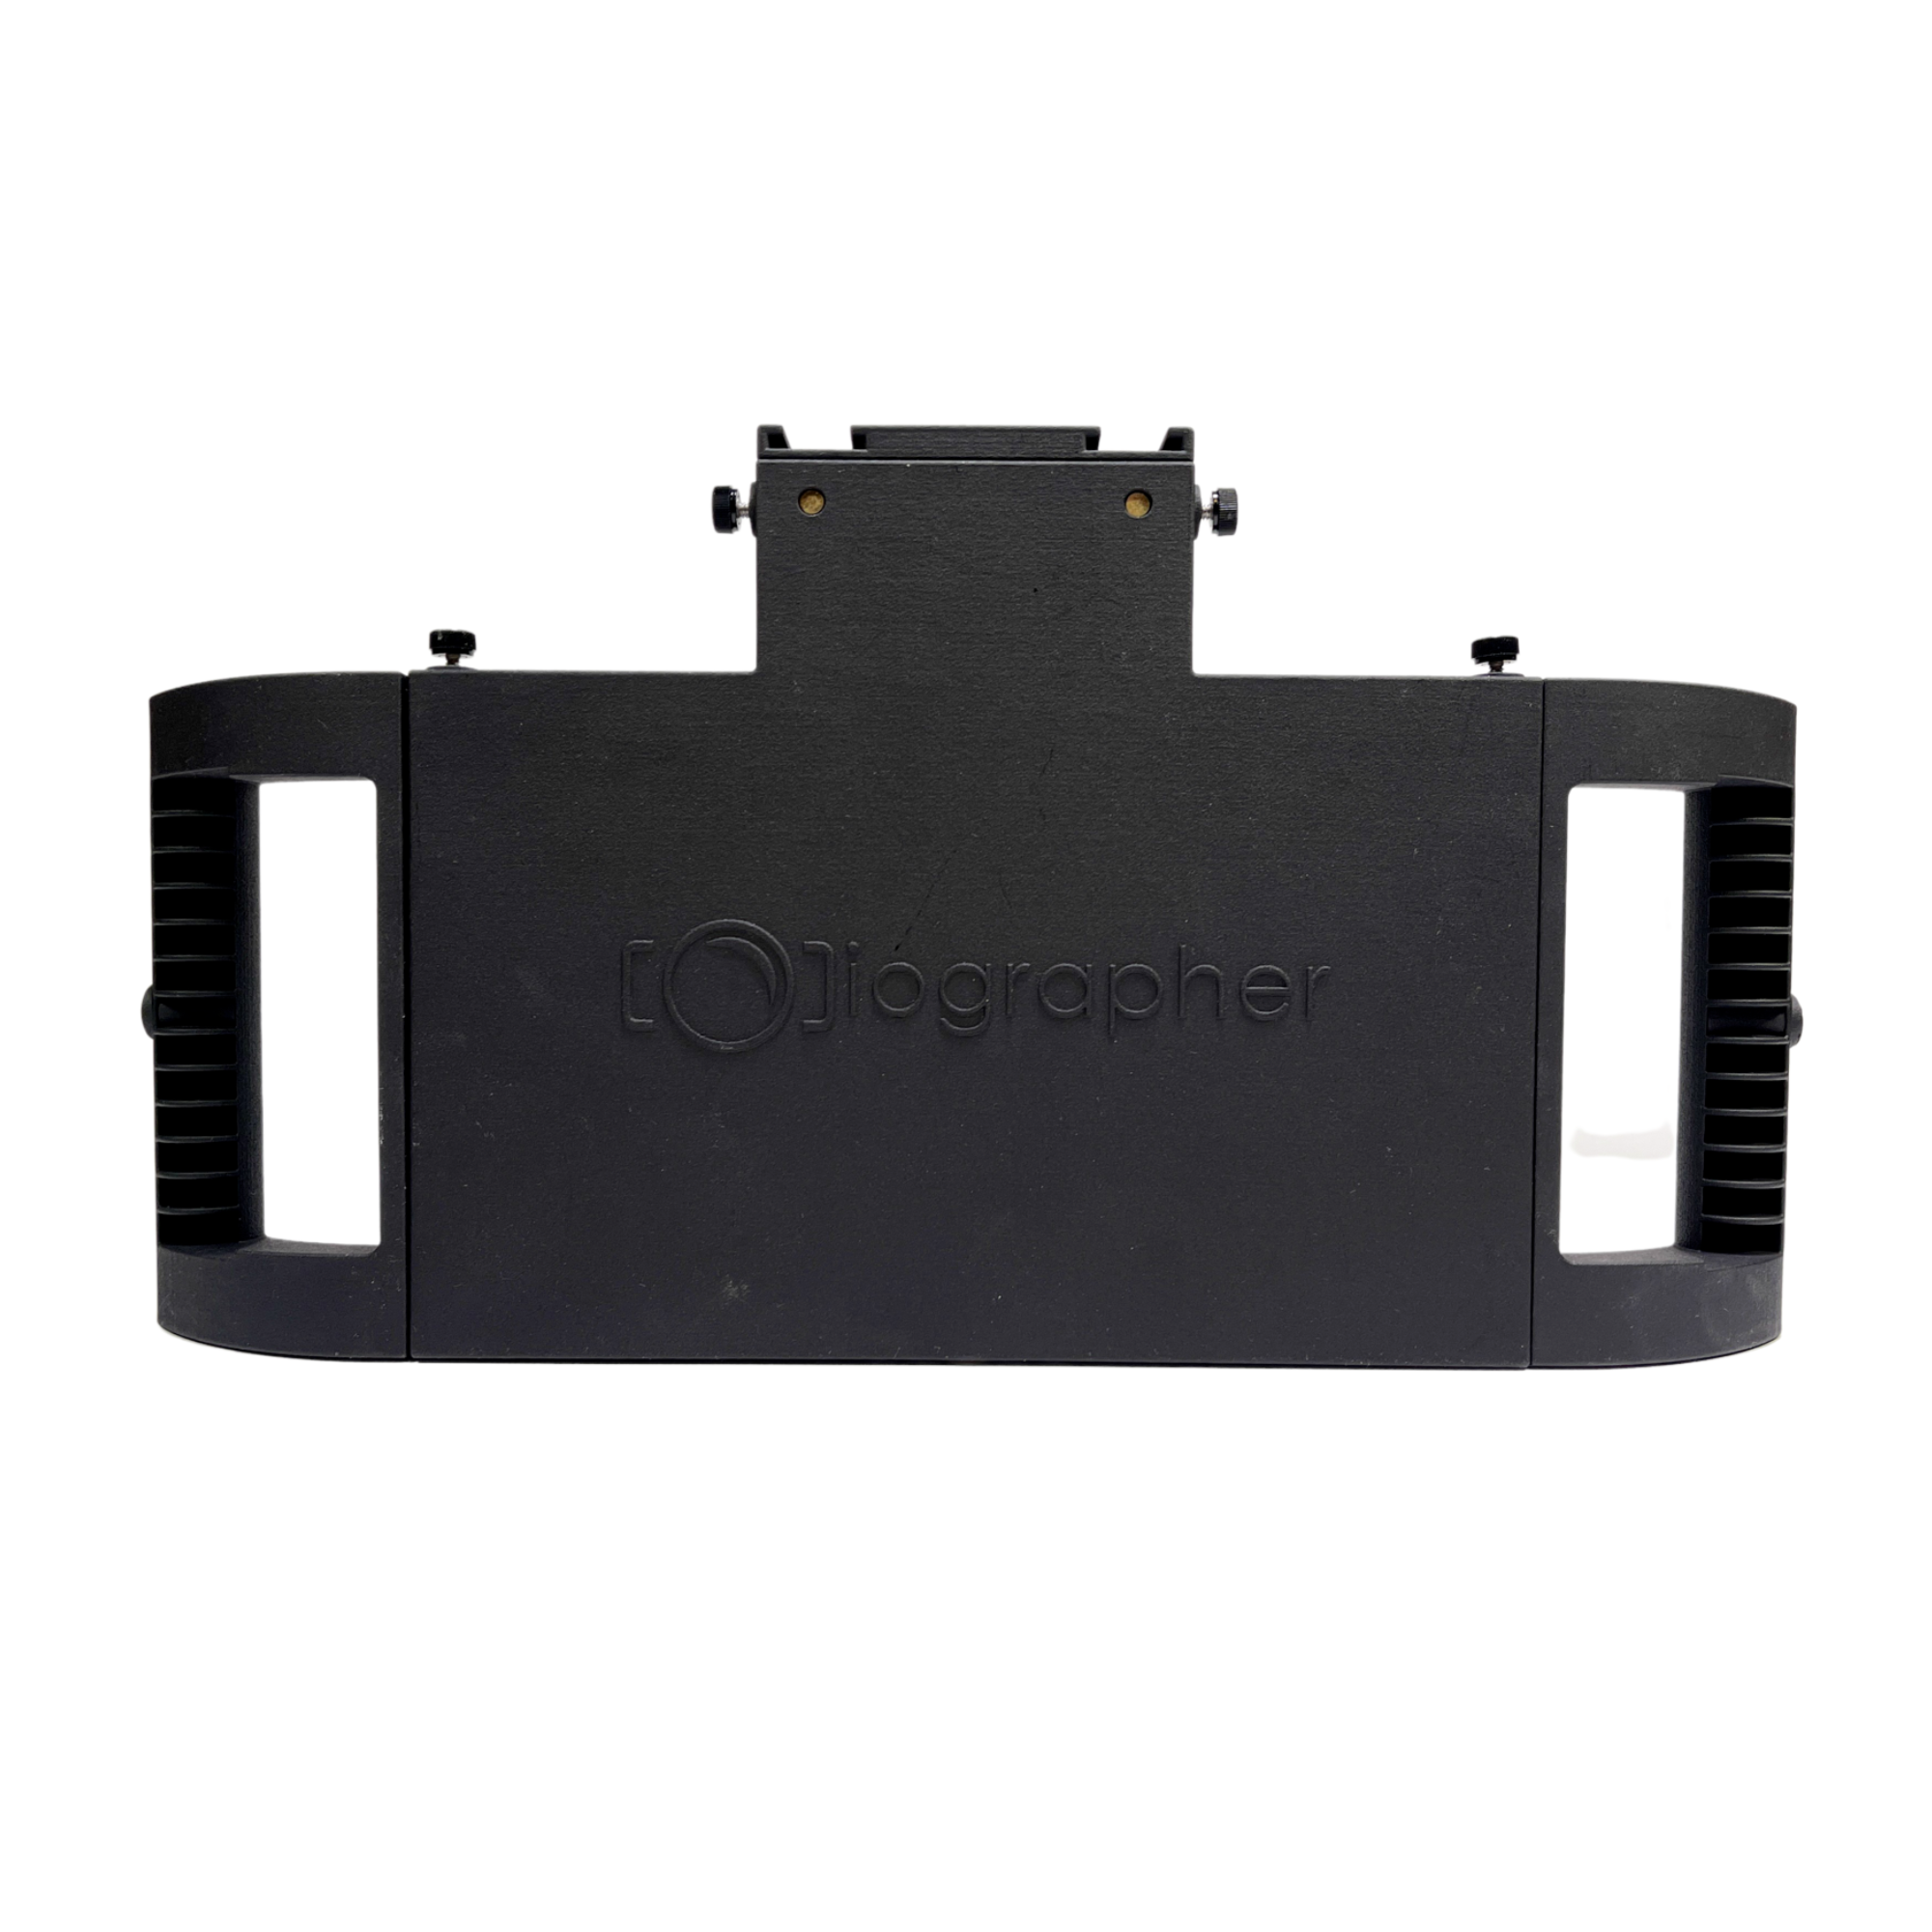 iOgrapher Multi Pro Case for iPad Pro 12.9, Pro 11, Air 4th and 5th Gen - Wide Angle Lens